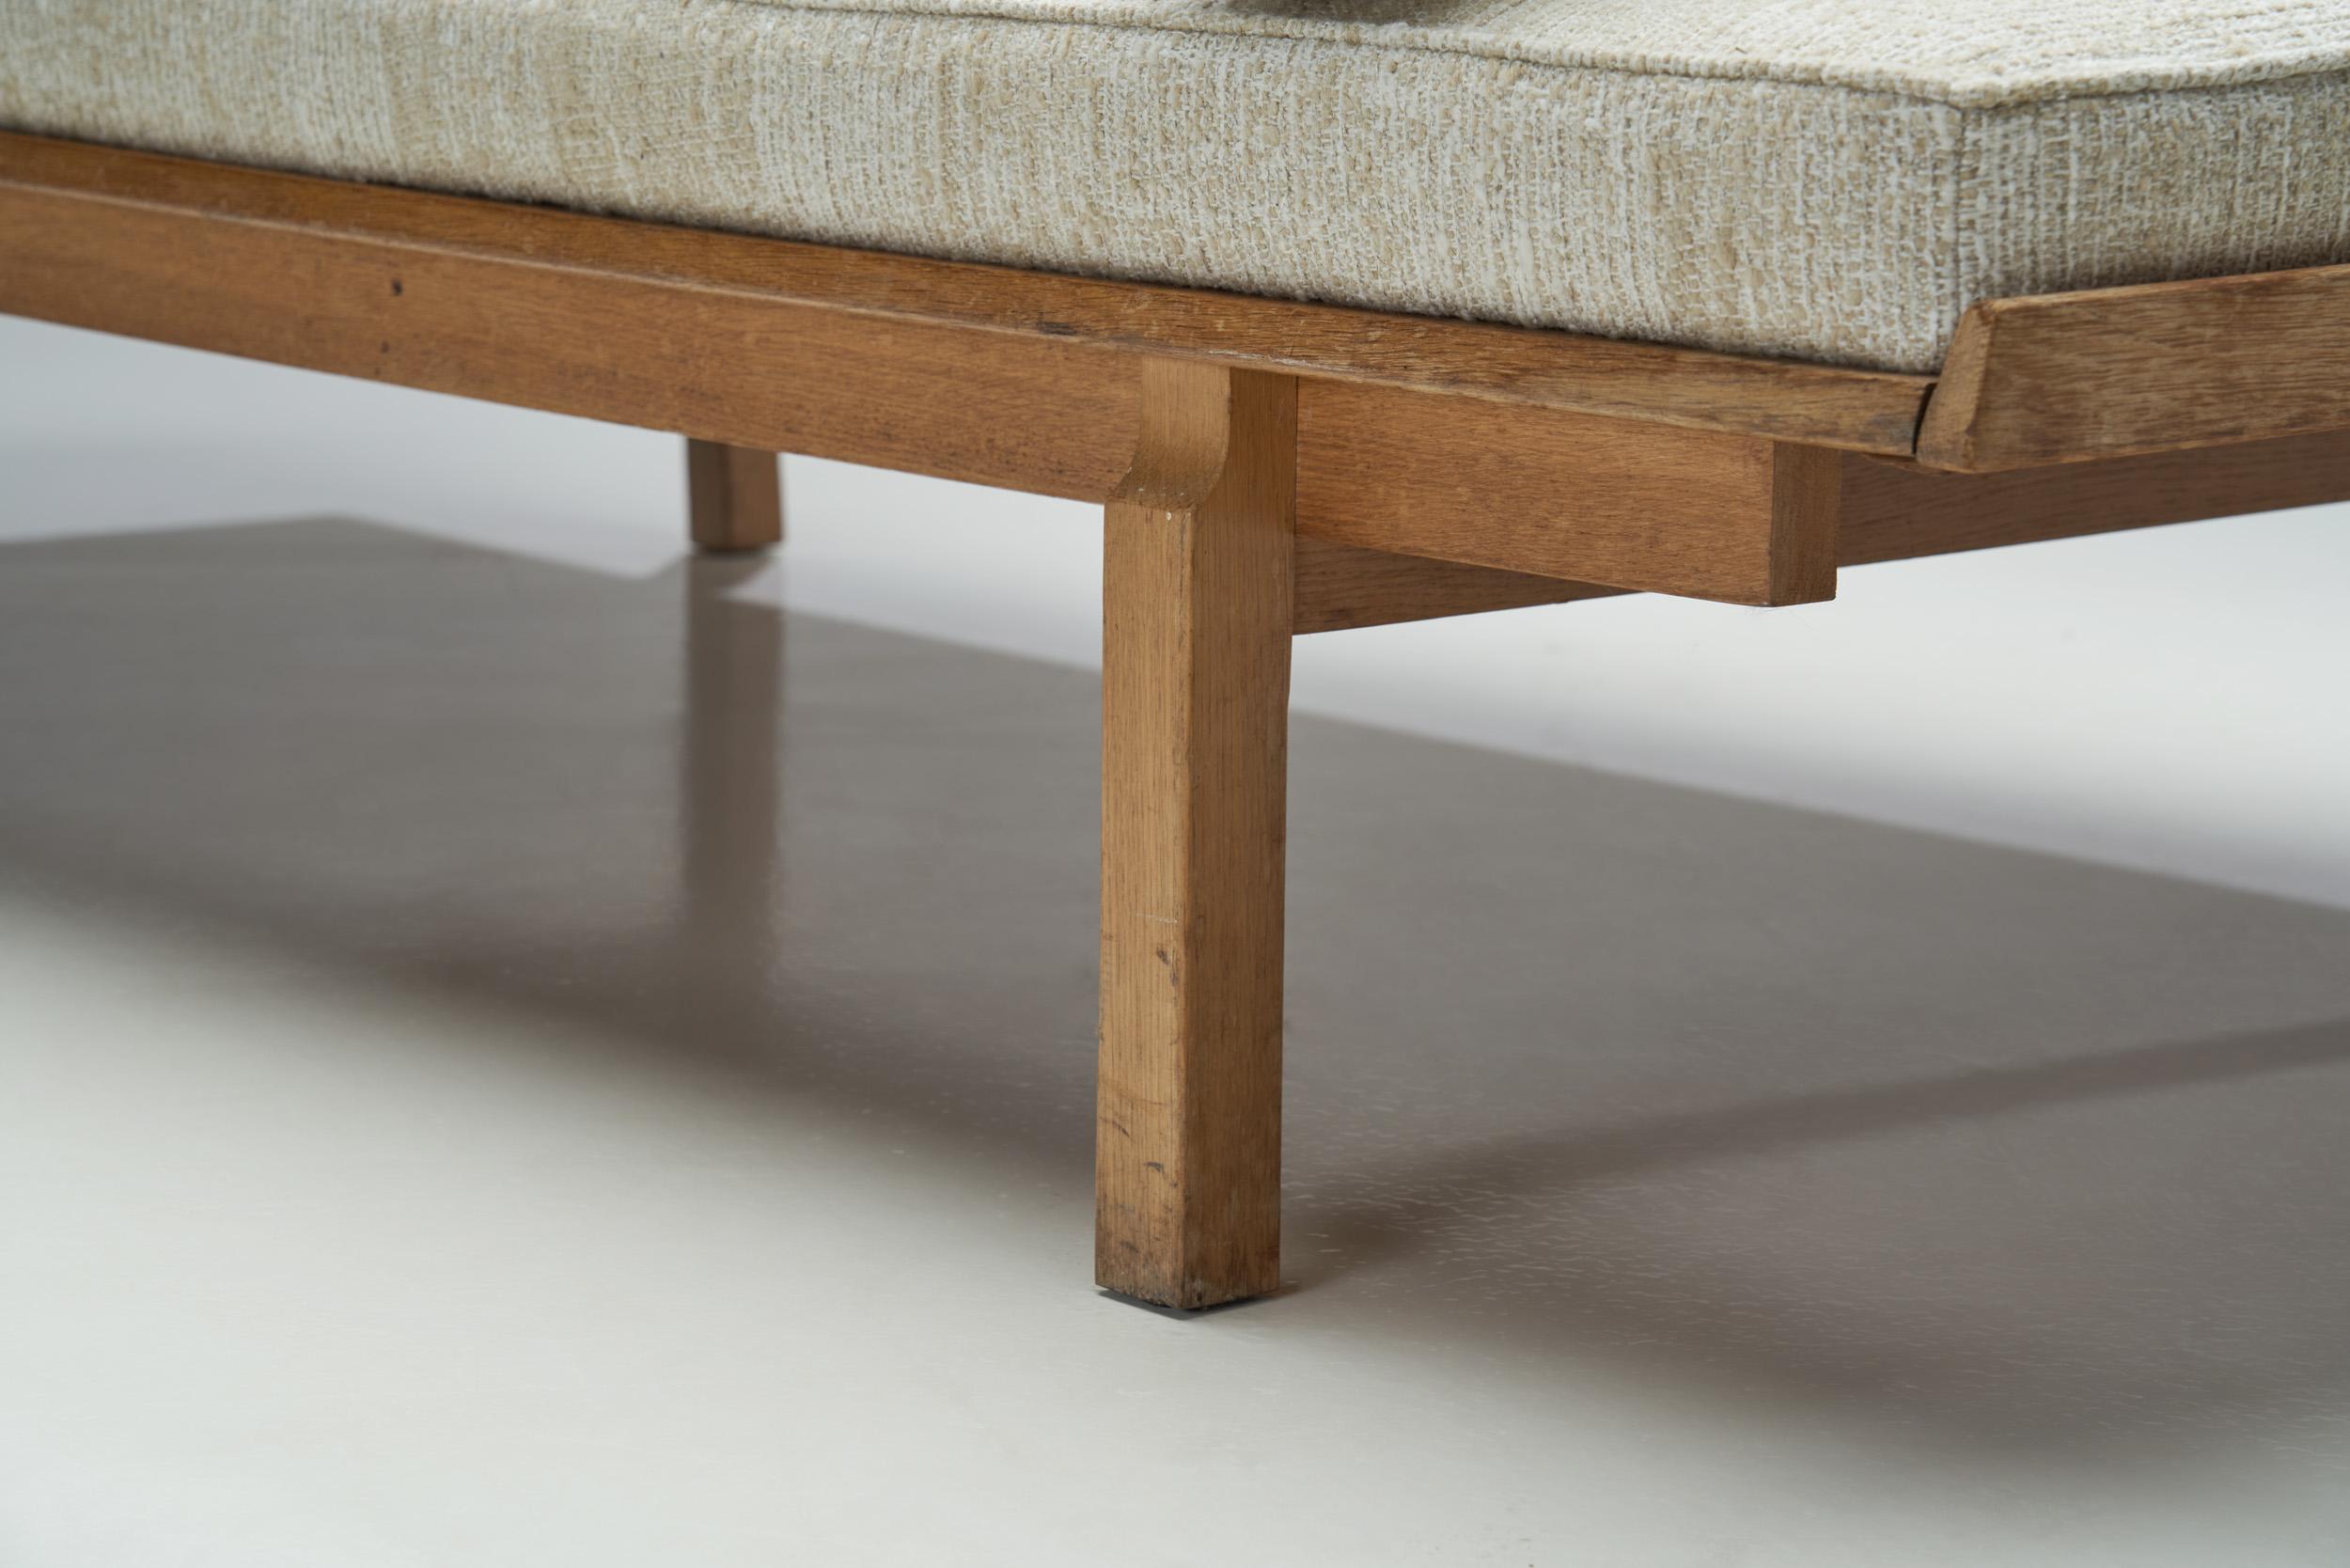 Danish Oak Daybed with Upholstered Mattress and Pillow, Denmark, ca 1950s For Sale 9